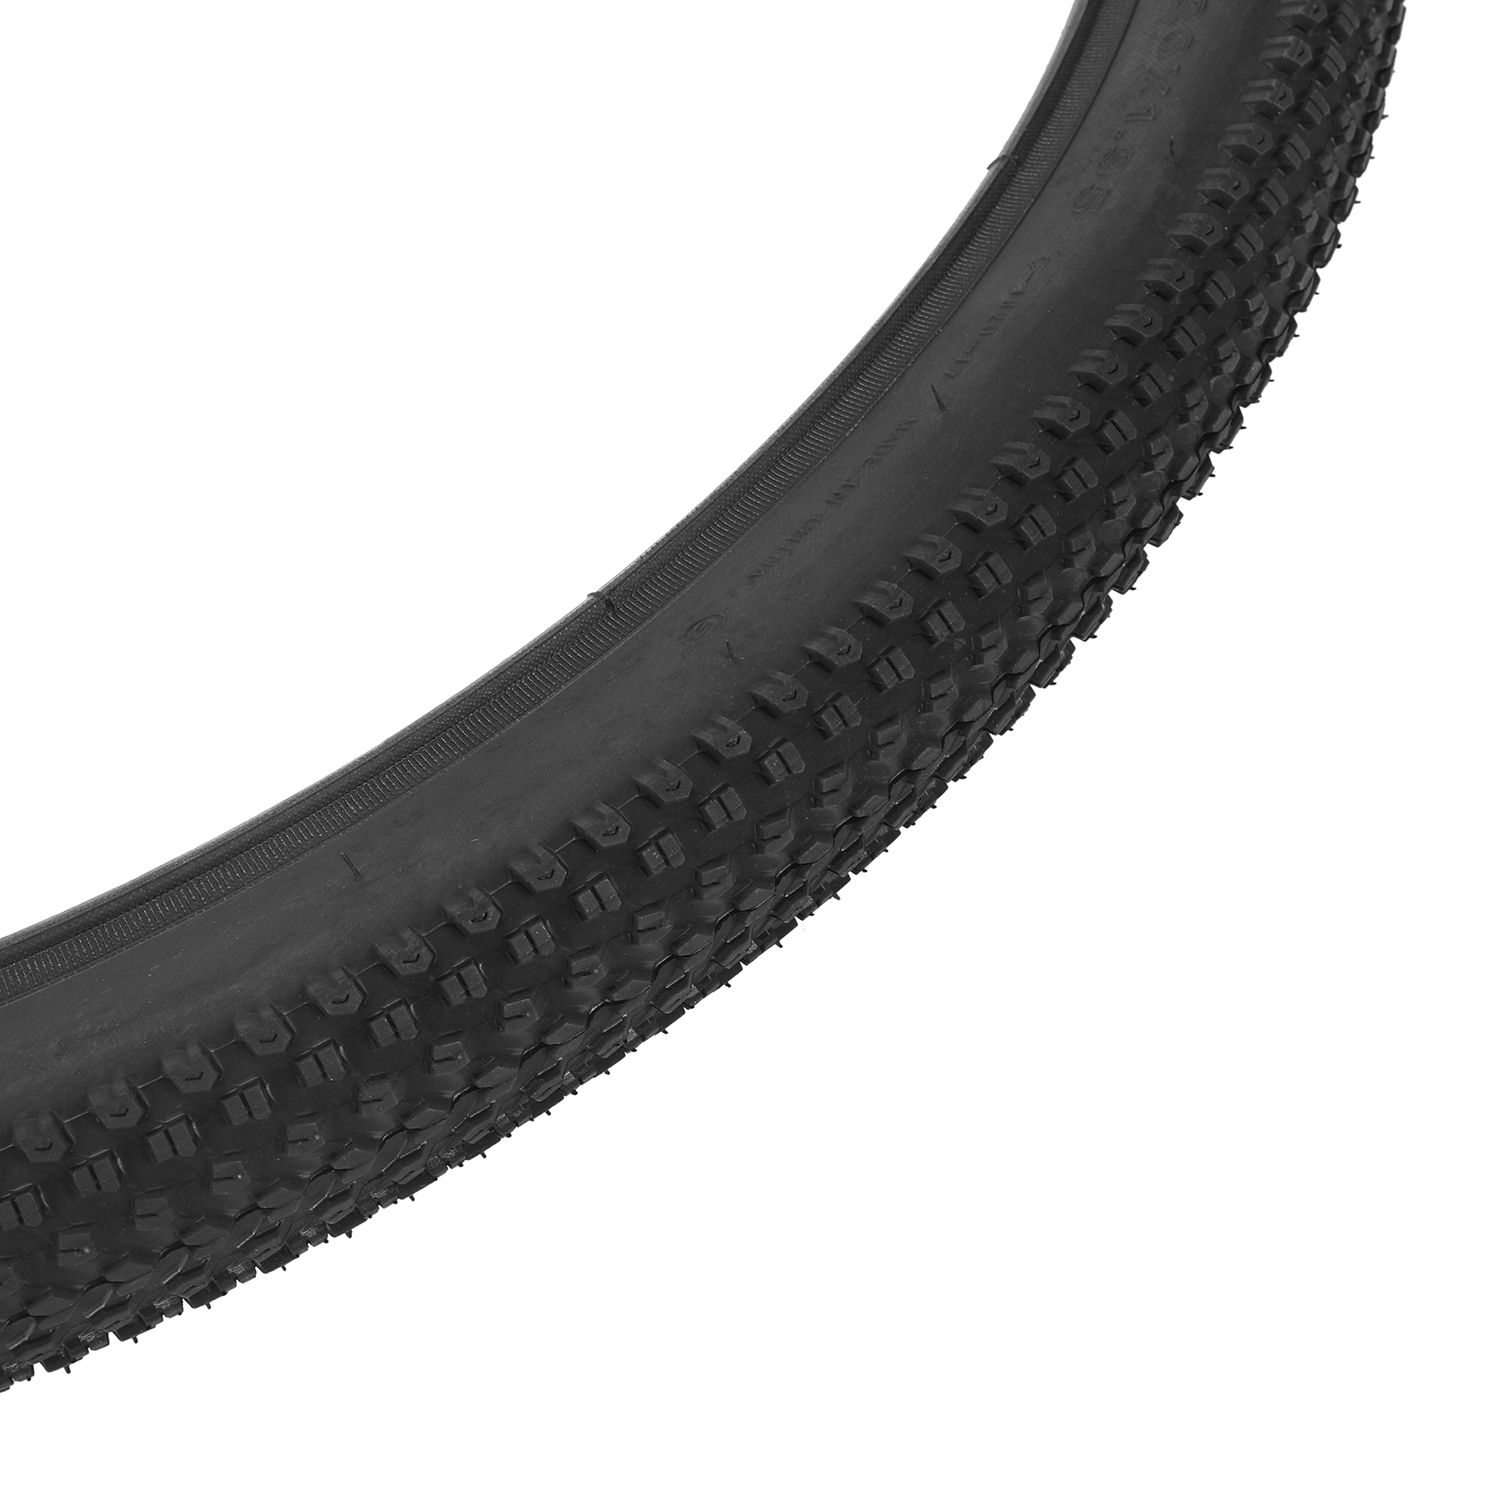 Find LAOTIE 26x1 95inch Outer Tire Electric Bike Tire for LAOTIE PX7 SAMEBIKE LO26 Electric Bike for Sale on Gipsybee.com with cryptocurrencies